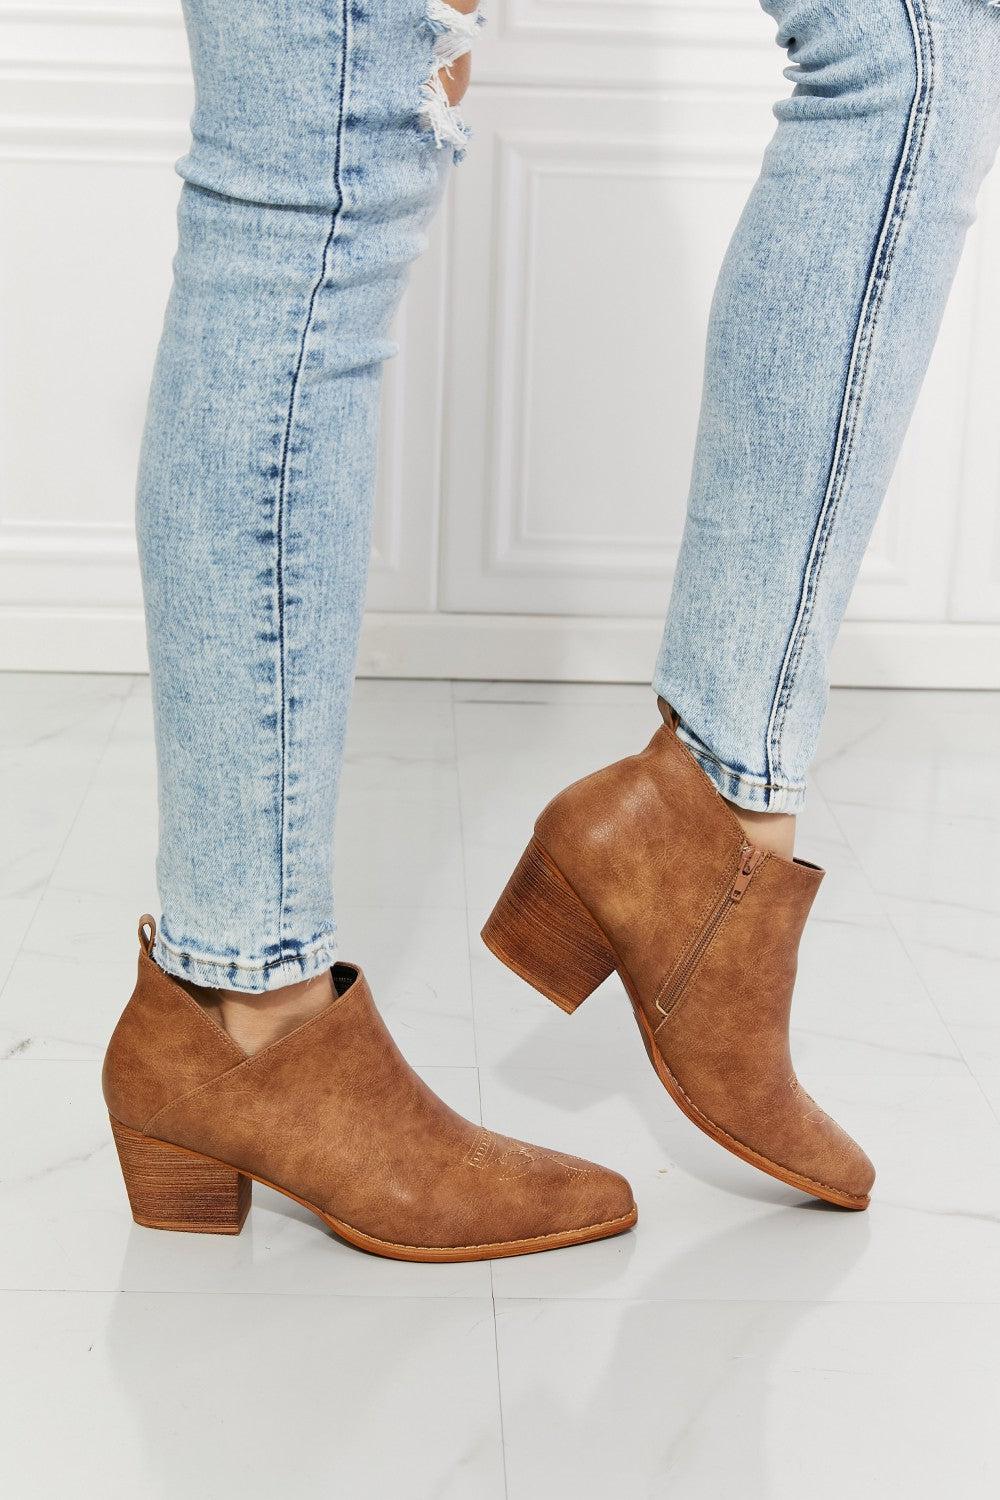 MMShoes Trust Yourself Embroidered Crossover Cowboy Bootie in Caramel BLUE ZONE PLANET